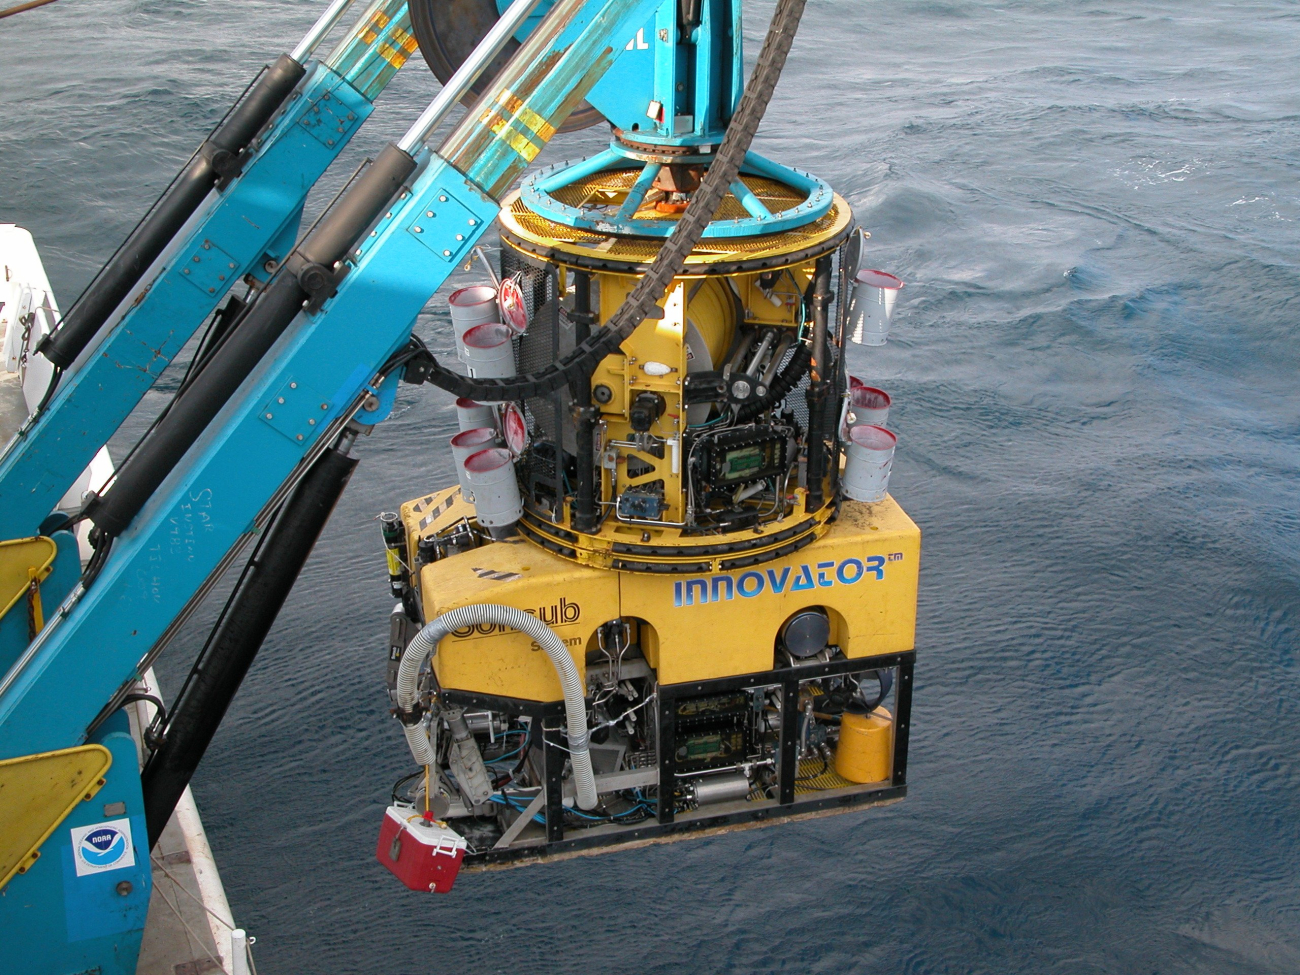 The tether management system sits on top of this ROV during deploymentand recovery of ROV